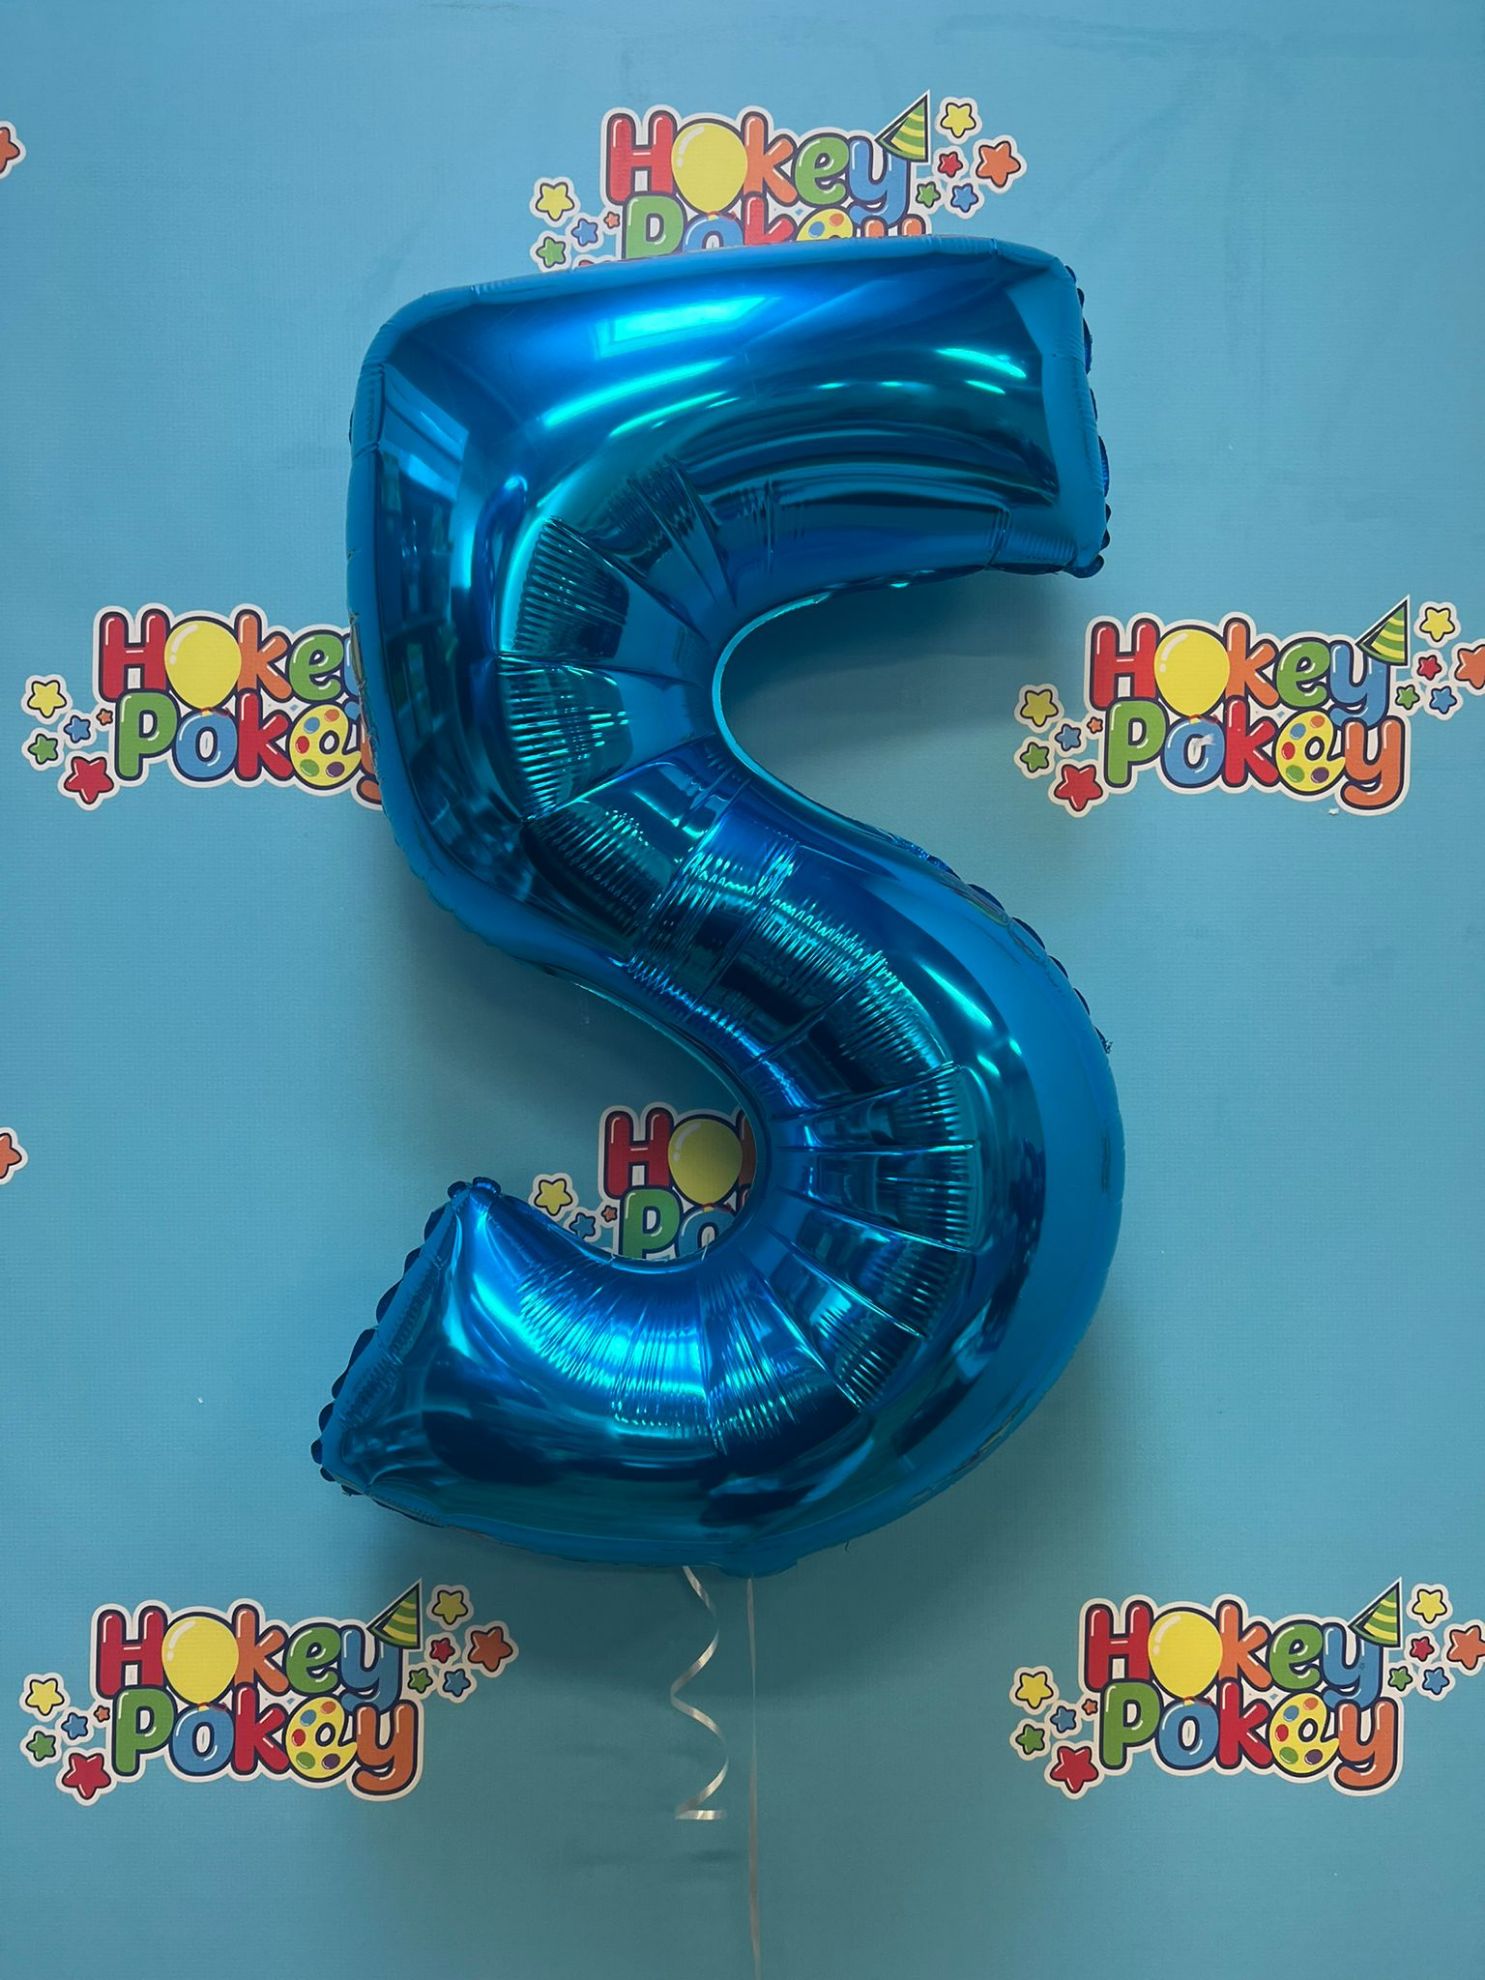 Picture of 26''Blue  Number 5 - Foil Balloon (helium-filled)